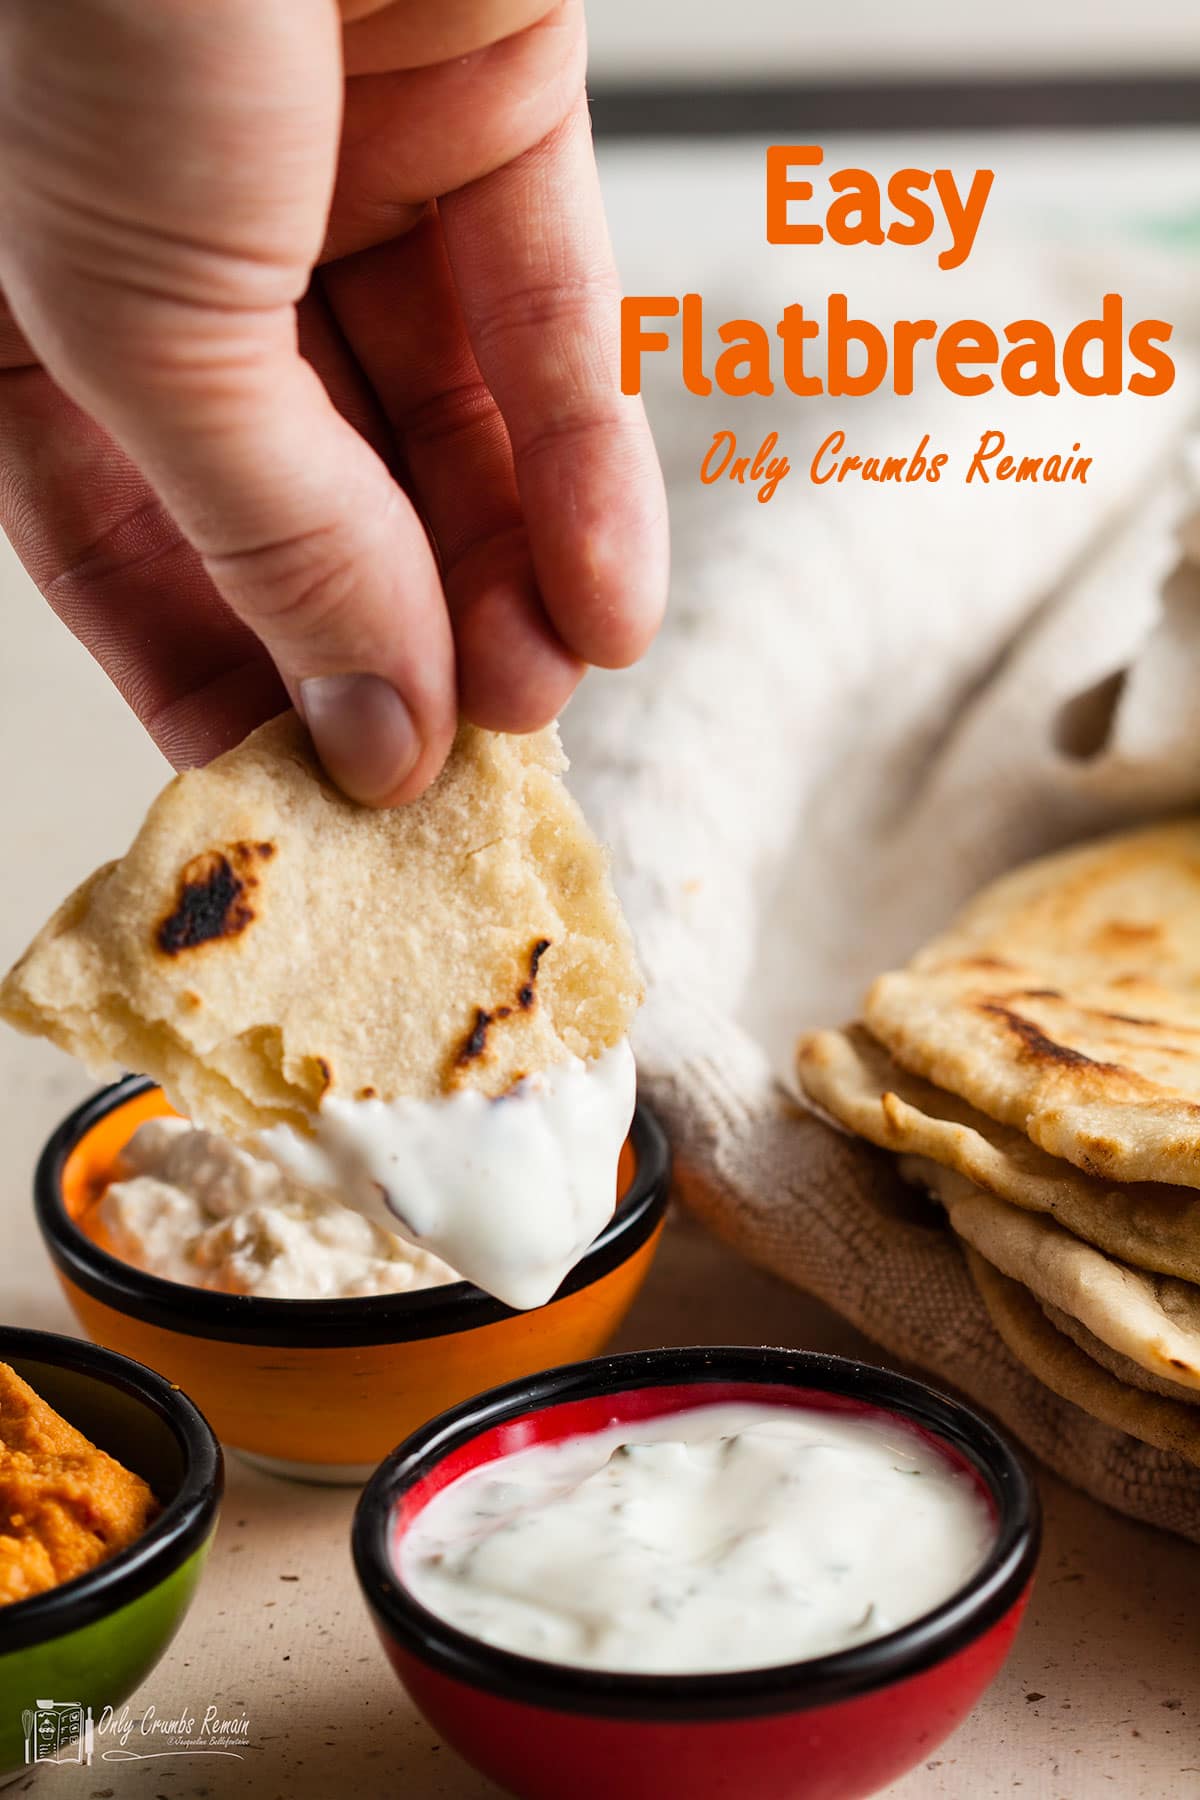 Easy flatbreads (no-yeast) | Only Crumbs Remain